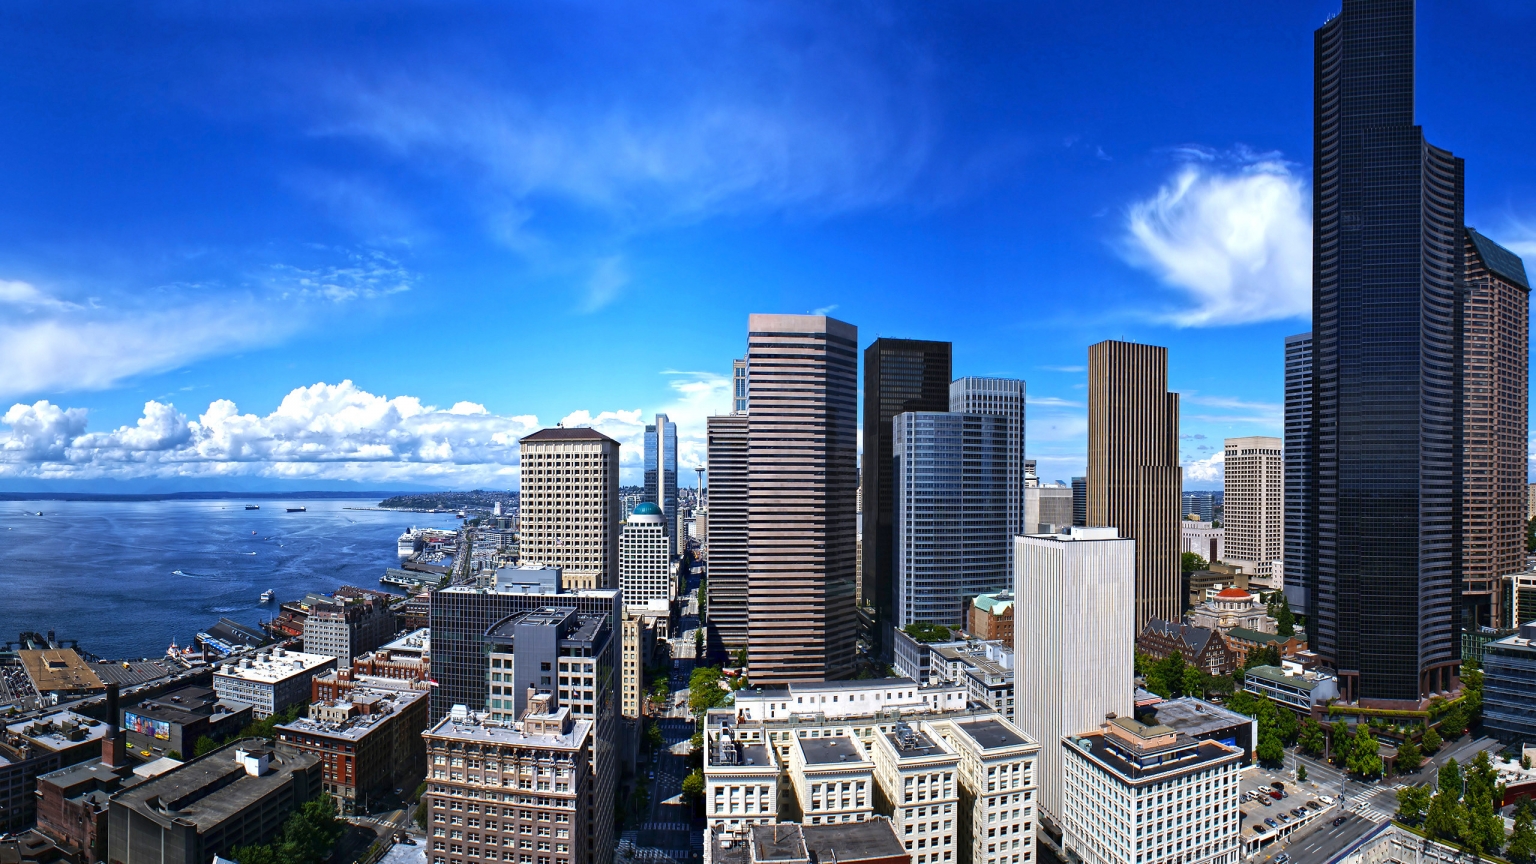 Seattle Town for 1536 x 864 HDTV resolution